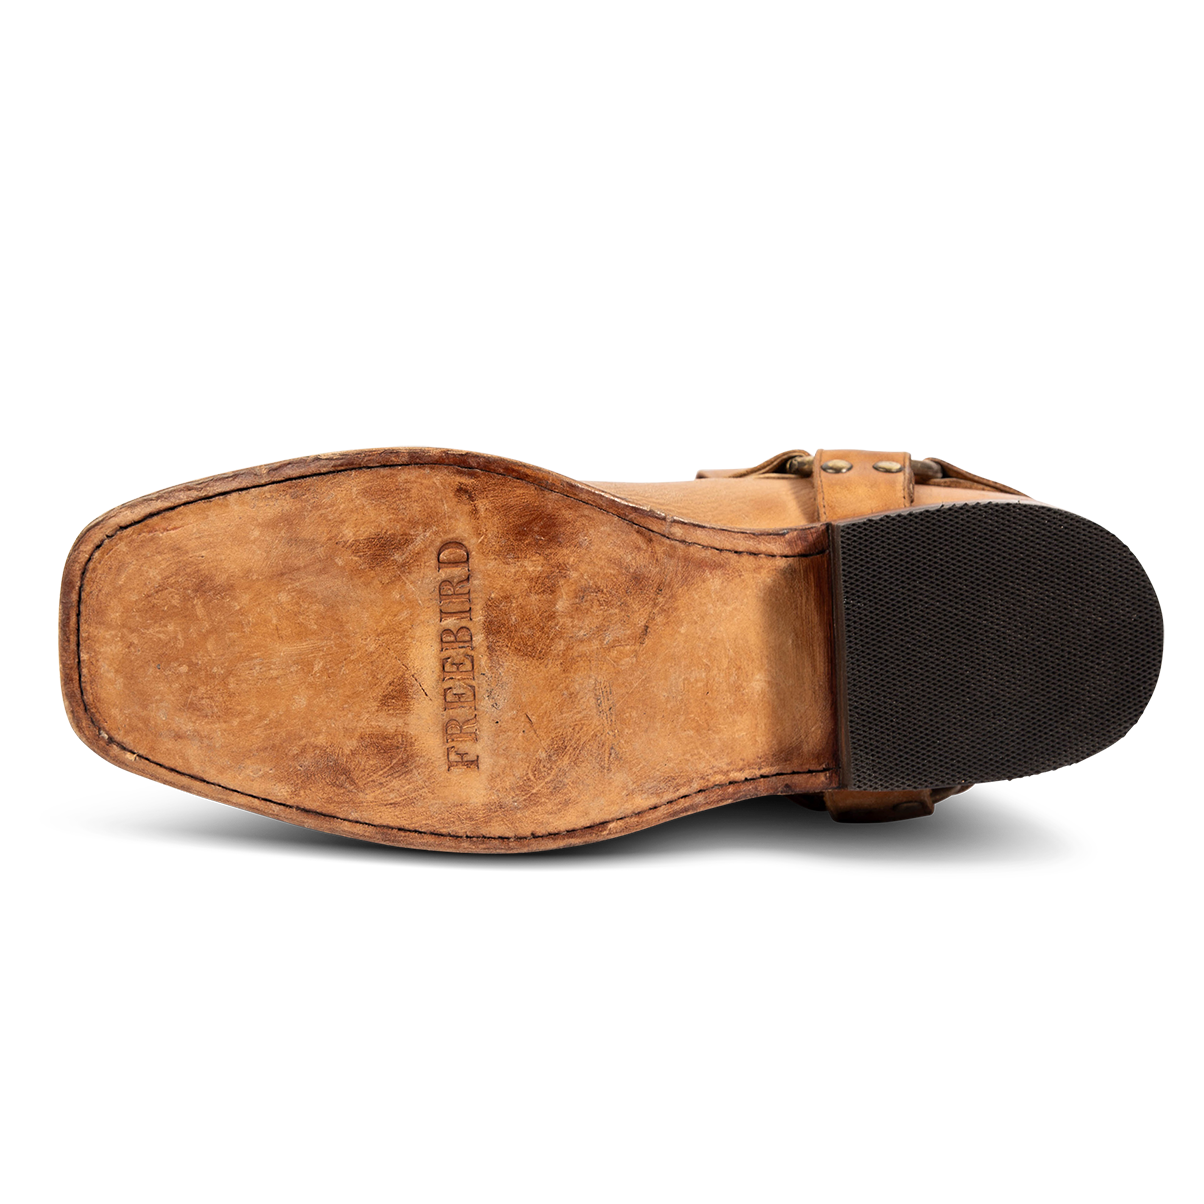 Leather sole imprinted with FREEBIRD on men's Copperhead banana boot